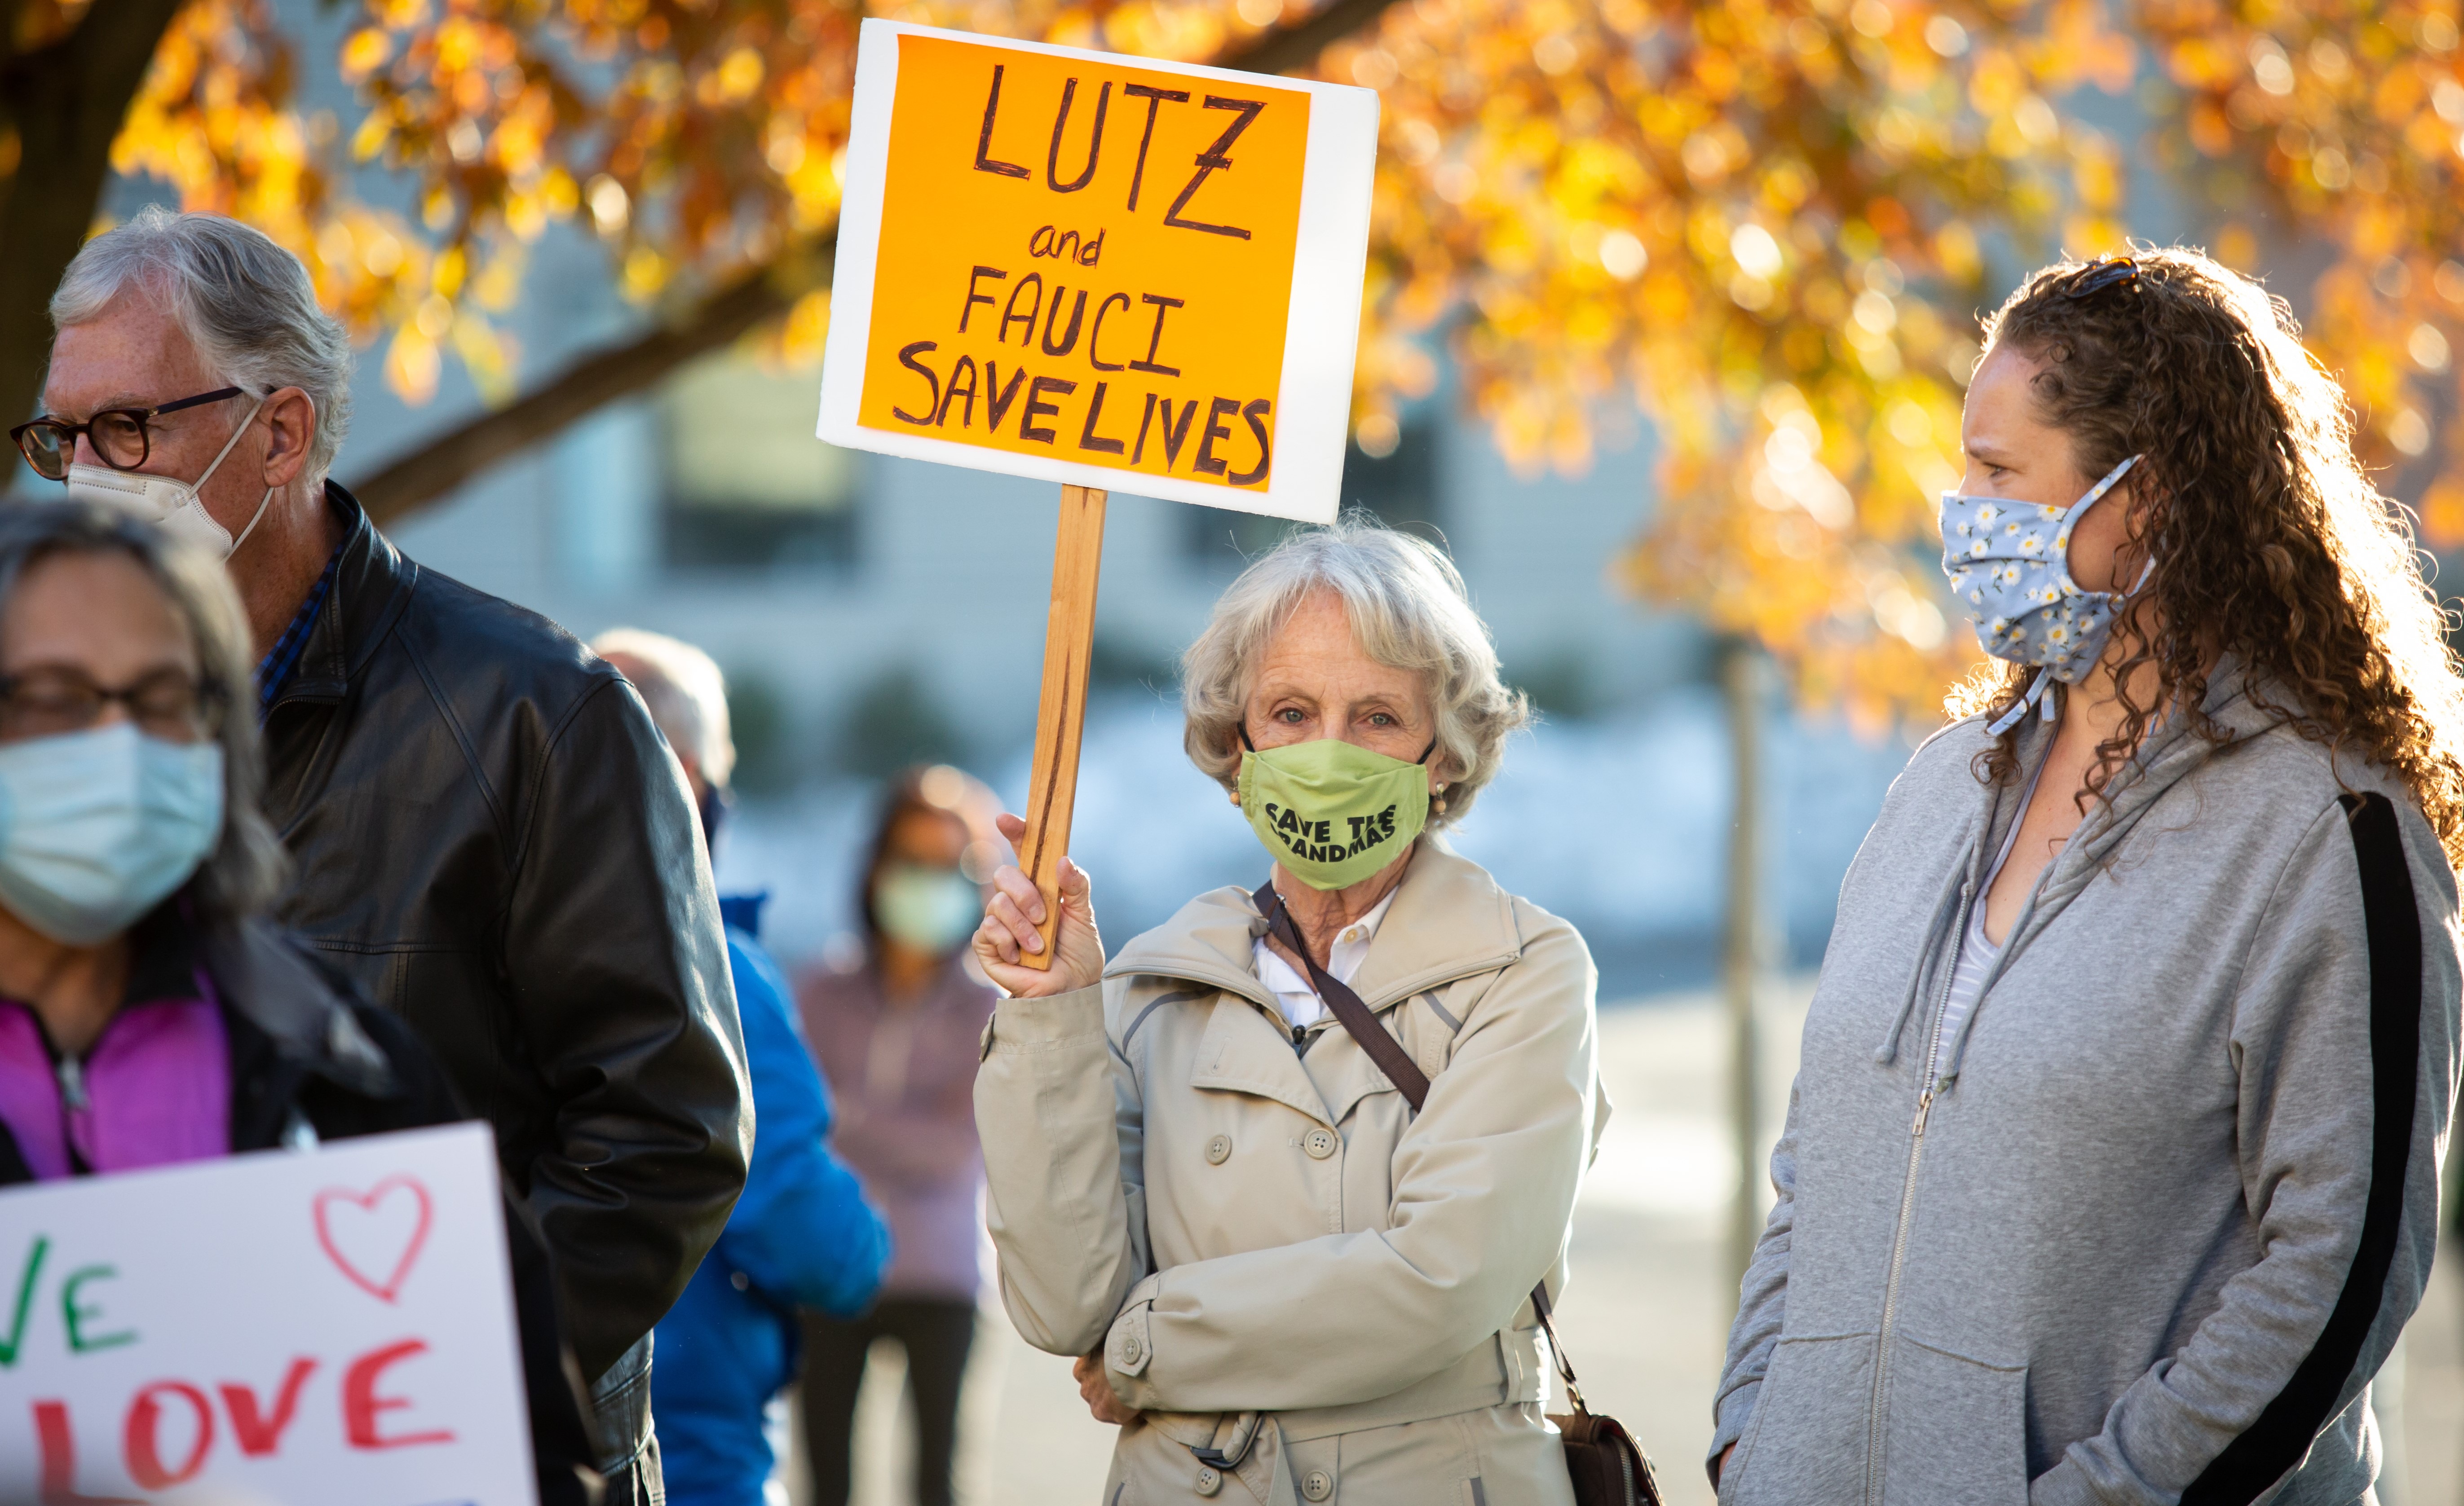 Carolyn Holmes holds a sign in favor of Dr. Anthony Fauci and Health Officer Bob Lutz during a protest against the Spokane Board of Health's ousting of Lutz, held on Nov. 1, 2020 outside the Spokane Regional Health District office. News of the controversial situation broke on Friday, and Lutz has since said that he will not resign and has acquired an attorney in order to keep his employment with the SRHD in the middle of the COVID-19 pandemic.